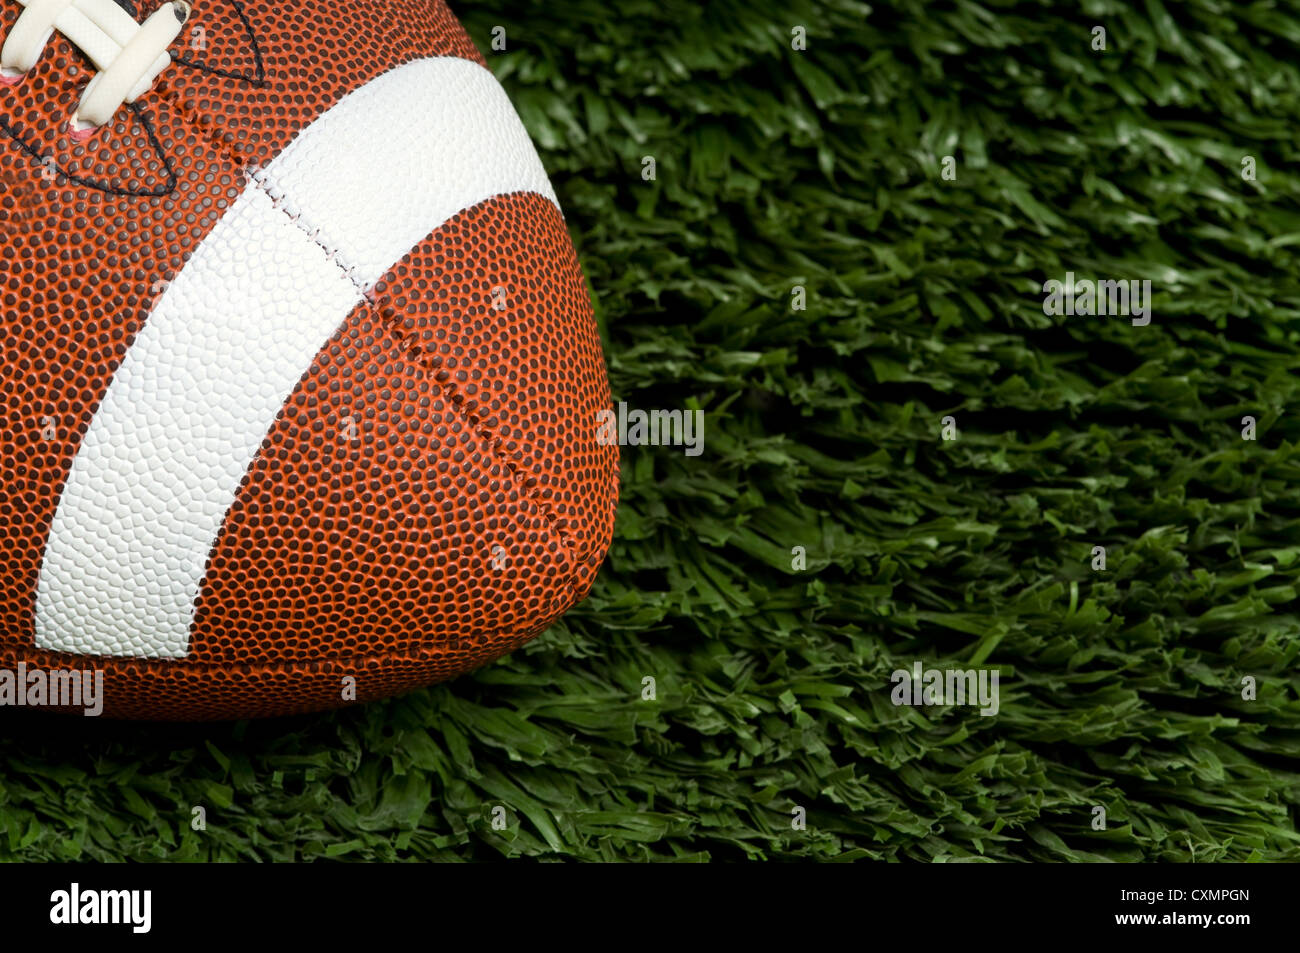 American football on green artificial grass field, copy space to the right Stock Photo